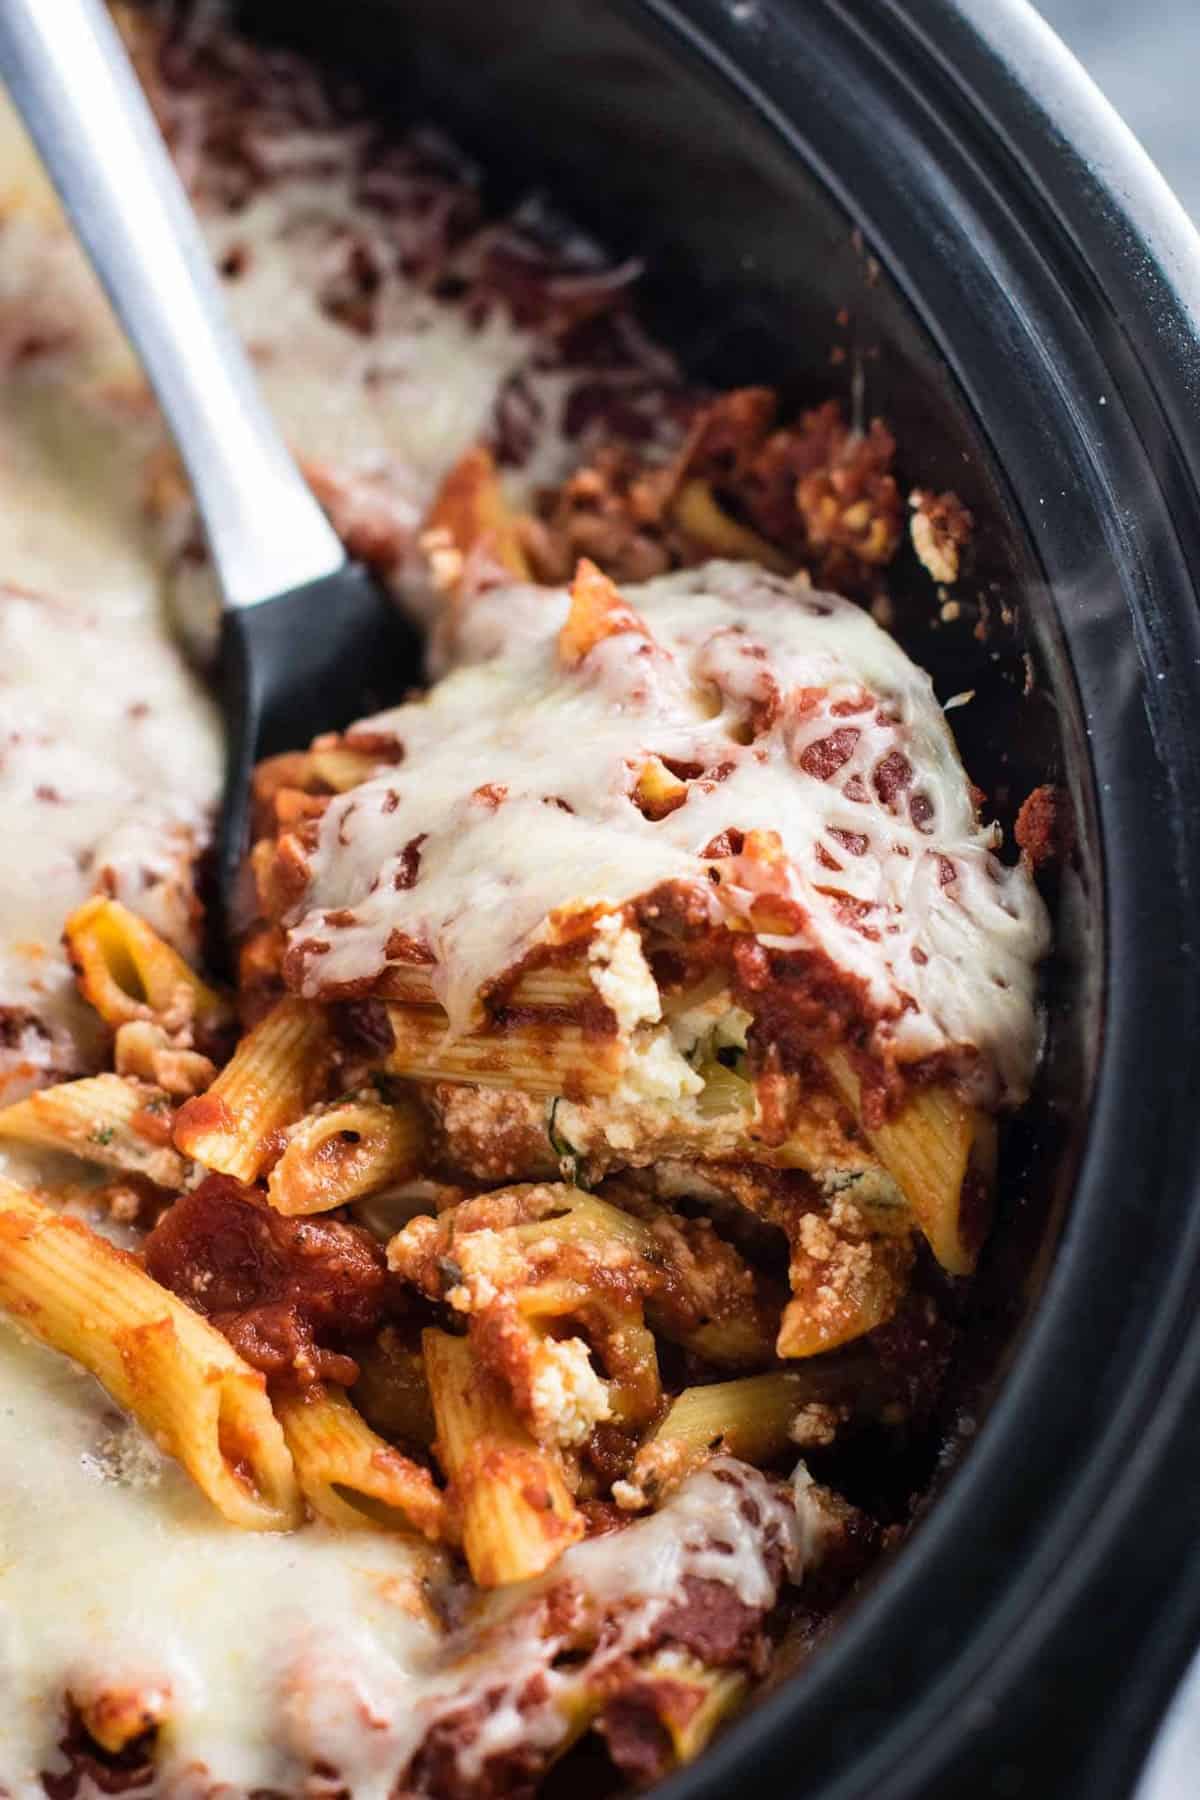 This Easy Crockpot Baked Ziti gets RAVE reviews. Everyone loves this when I make it! So simple to assemble and you don’t even have to cook the noodles first! #crockpotbakedziti #ziti #pasta #slowcooker